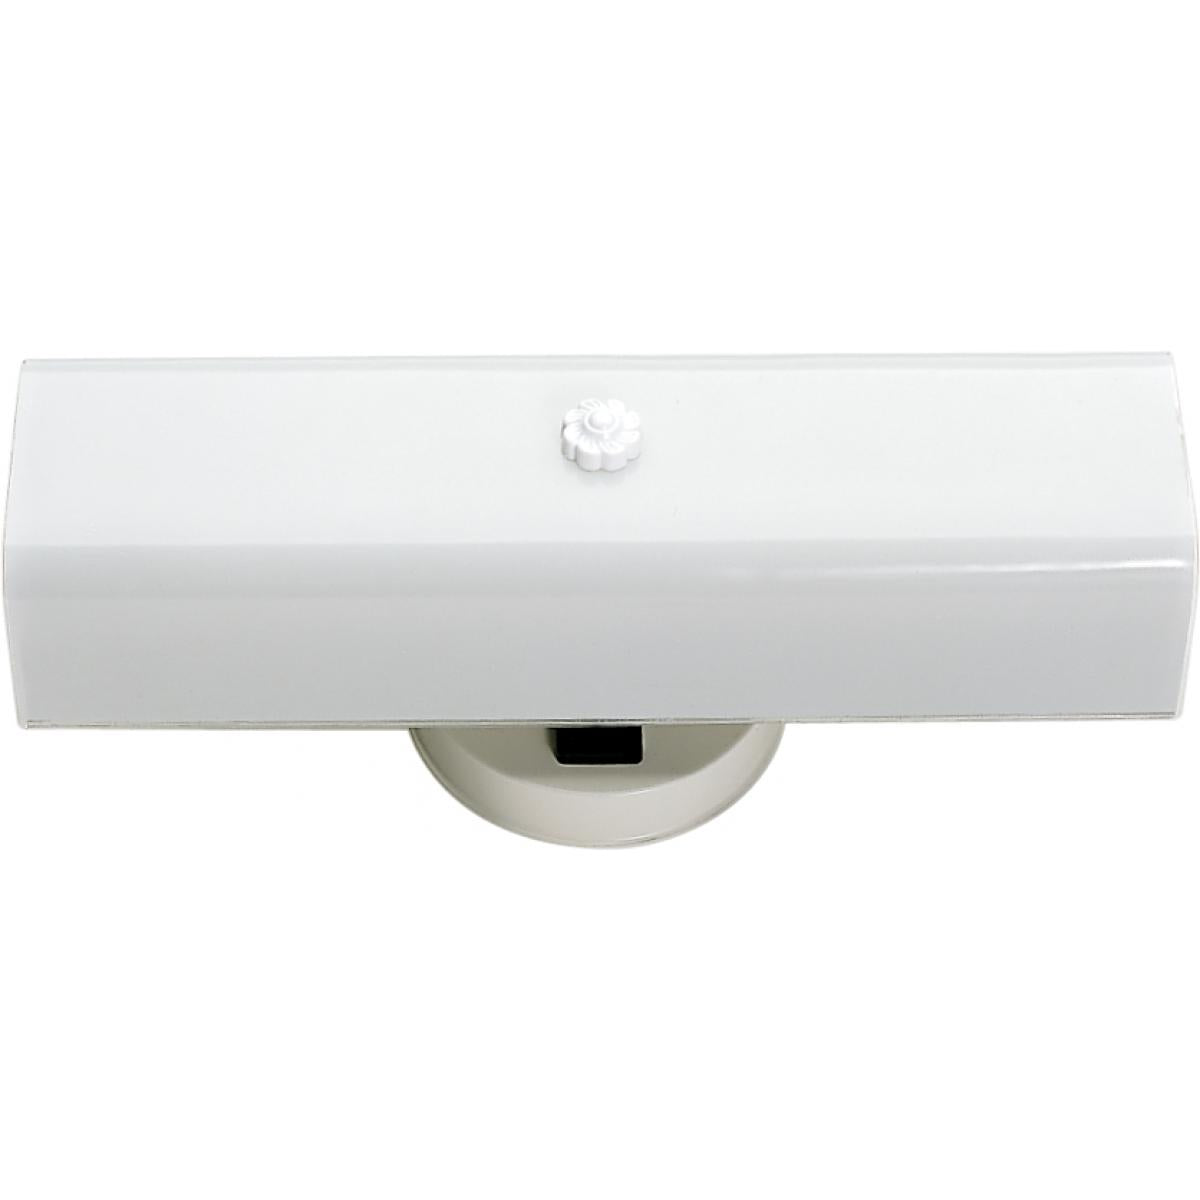 Satco 77-990 2 Light - 14" Vanity with White "U" Channel Glass with Convenience Outlet - White Finish